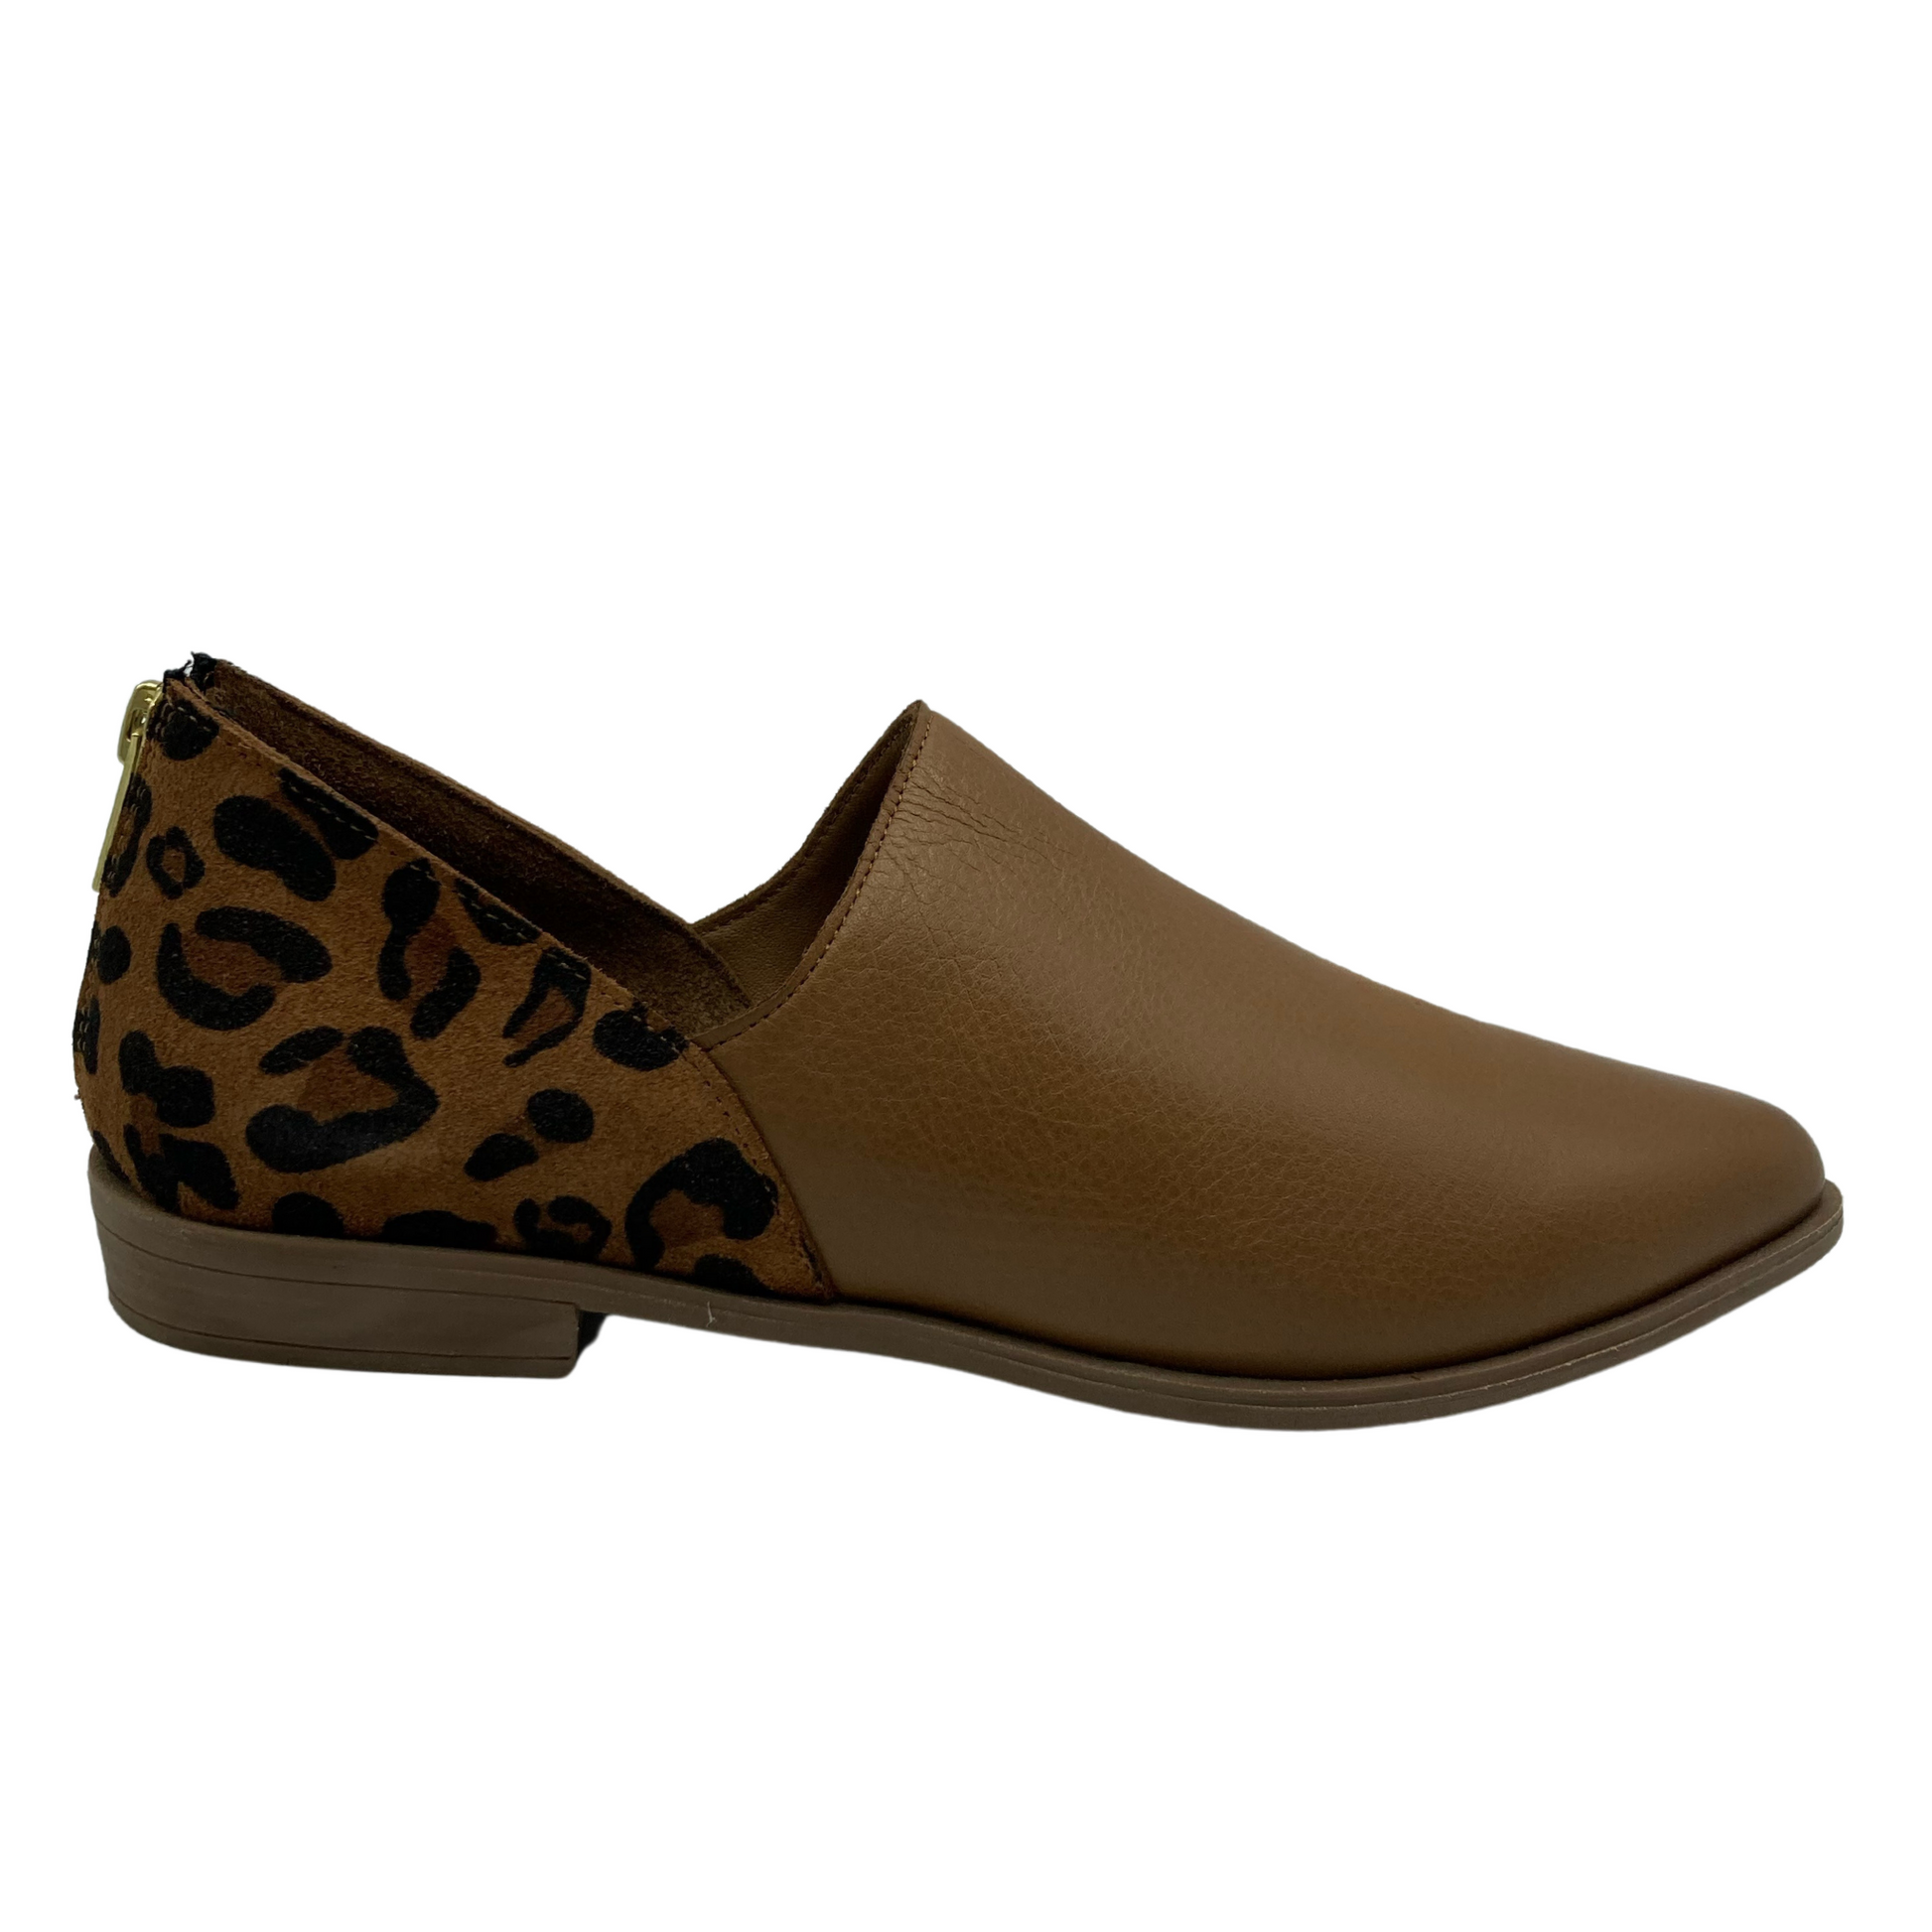 Side view of brown pointed toe shoe with low heel